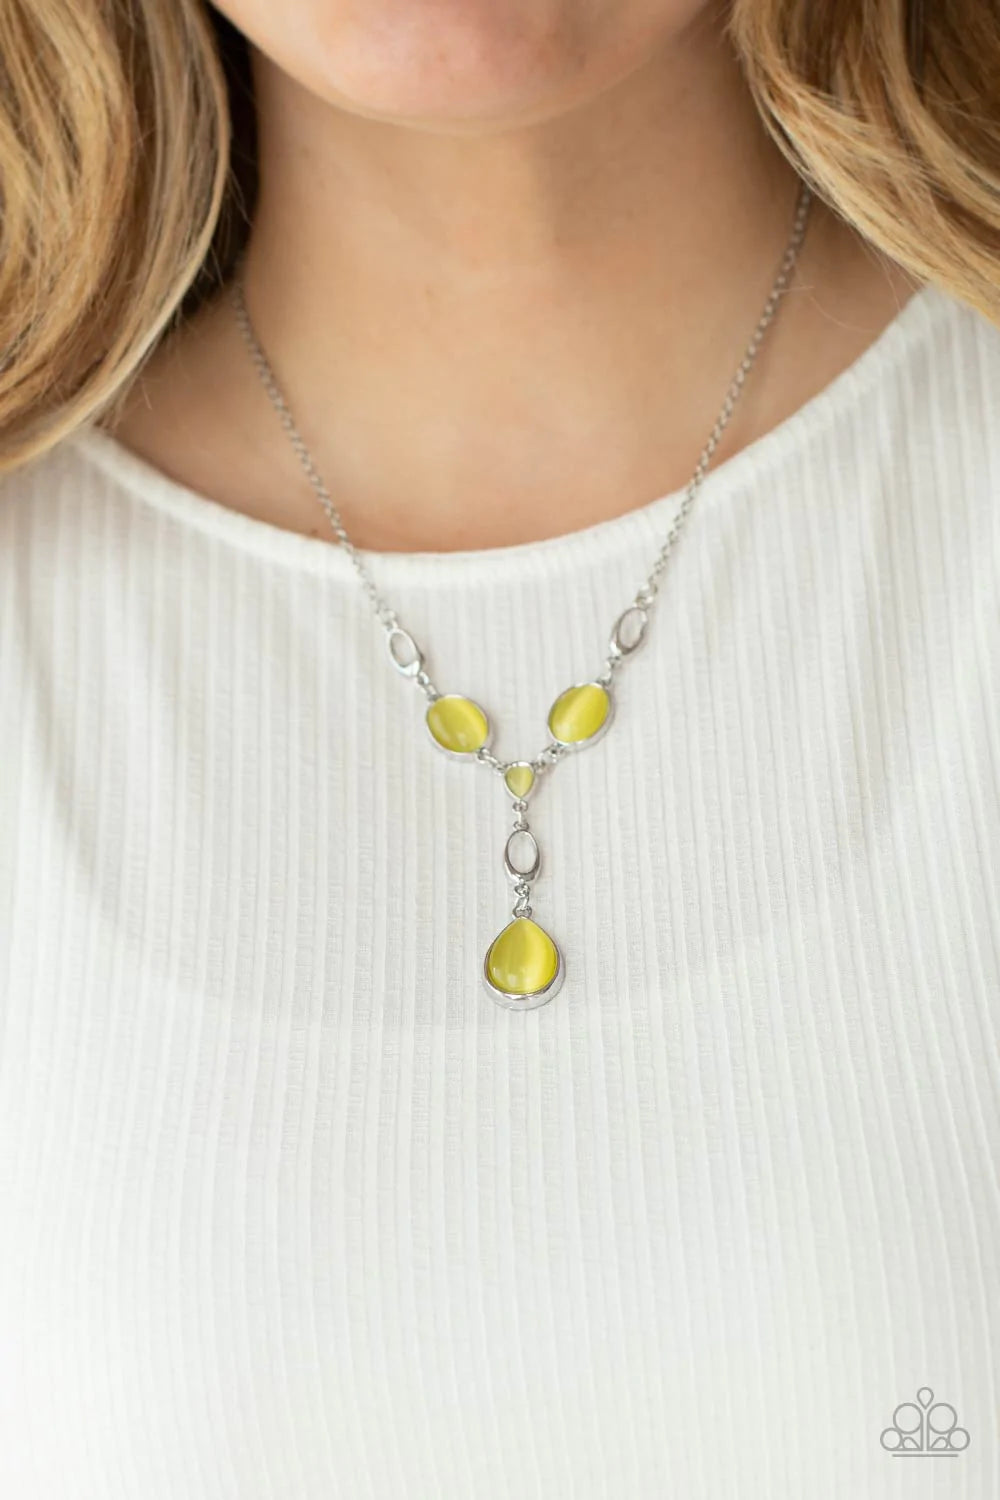 Paparazzi Accessories Ritzy Refinement - Yellow Smoldering yellow cat's eye stones and silver accents delicately link across the collar. A stunning yellow cat's eye teardrop pendant swings from a silver loop for a sophisticated and refined finish. Feature